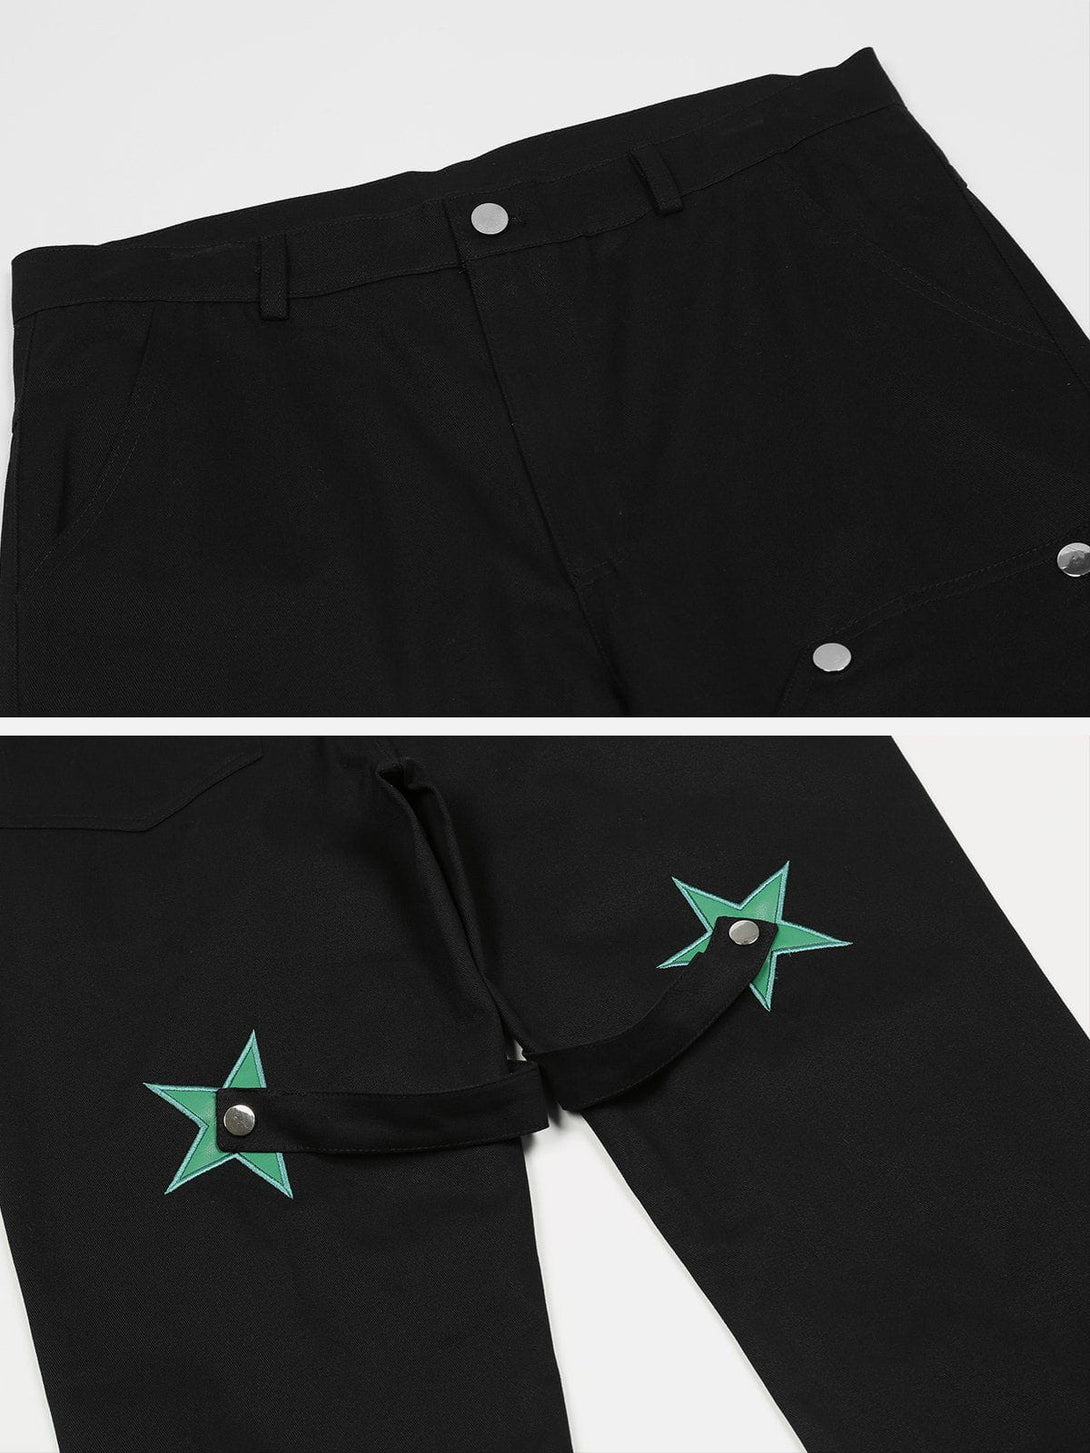 Levefly - Star Embroidery Cargo Pants - Streetwear Fashion - levefly.com